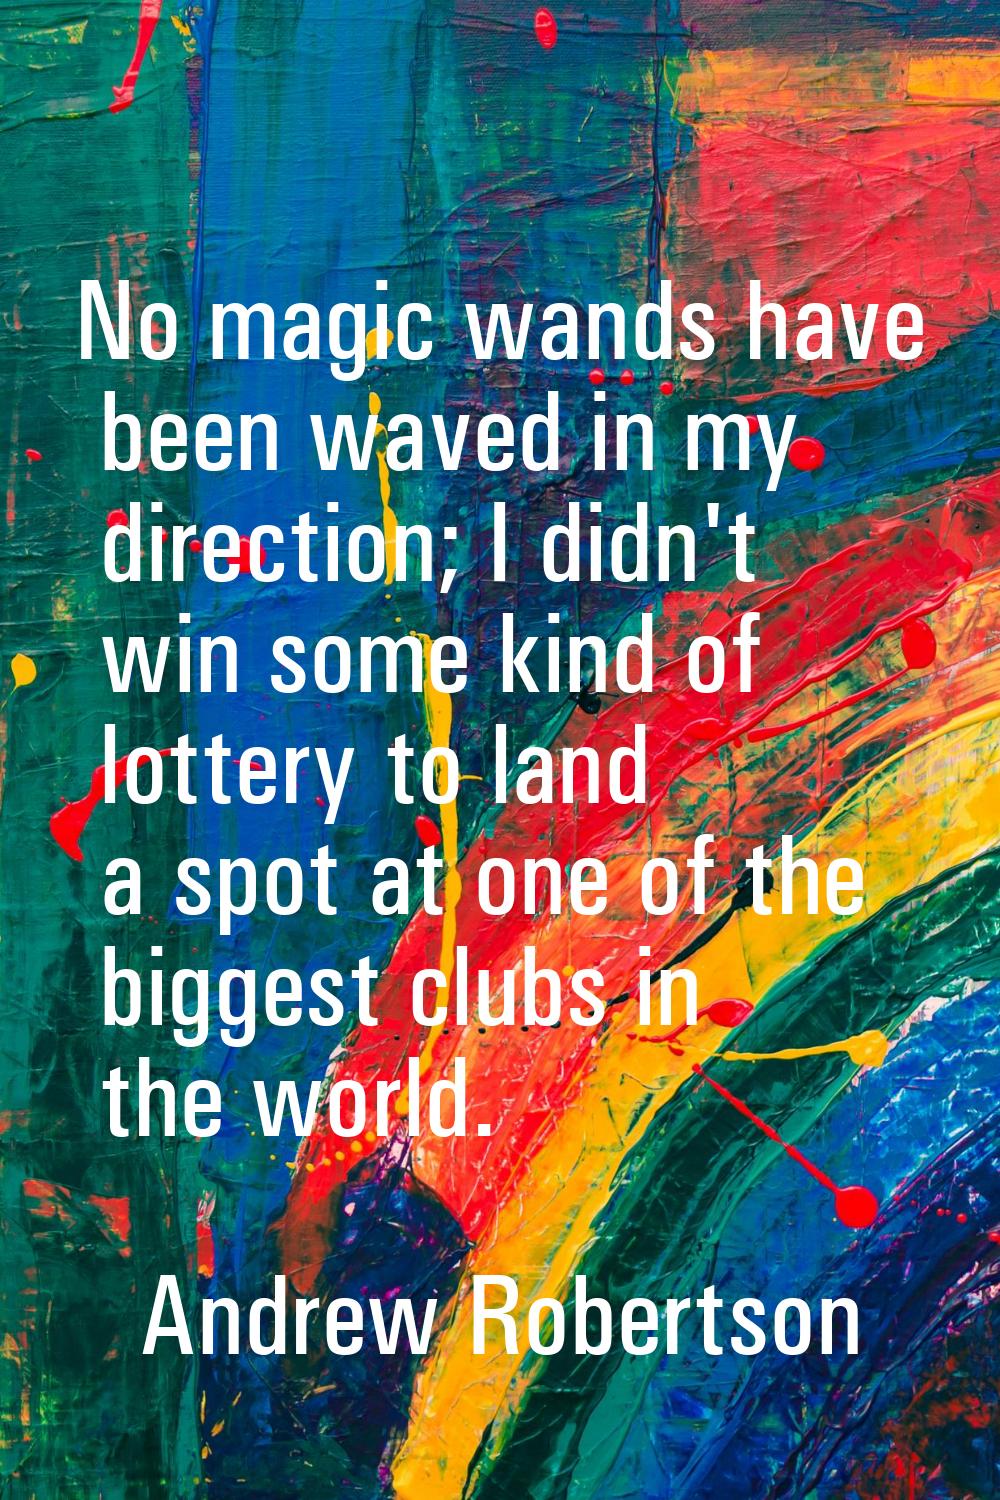 No magic wands have been waved in my direction; I didn't win some kind of lottery to land a spot at